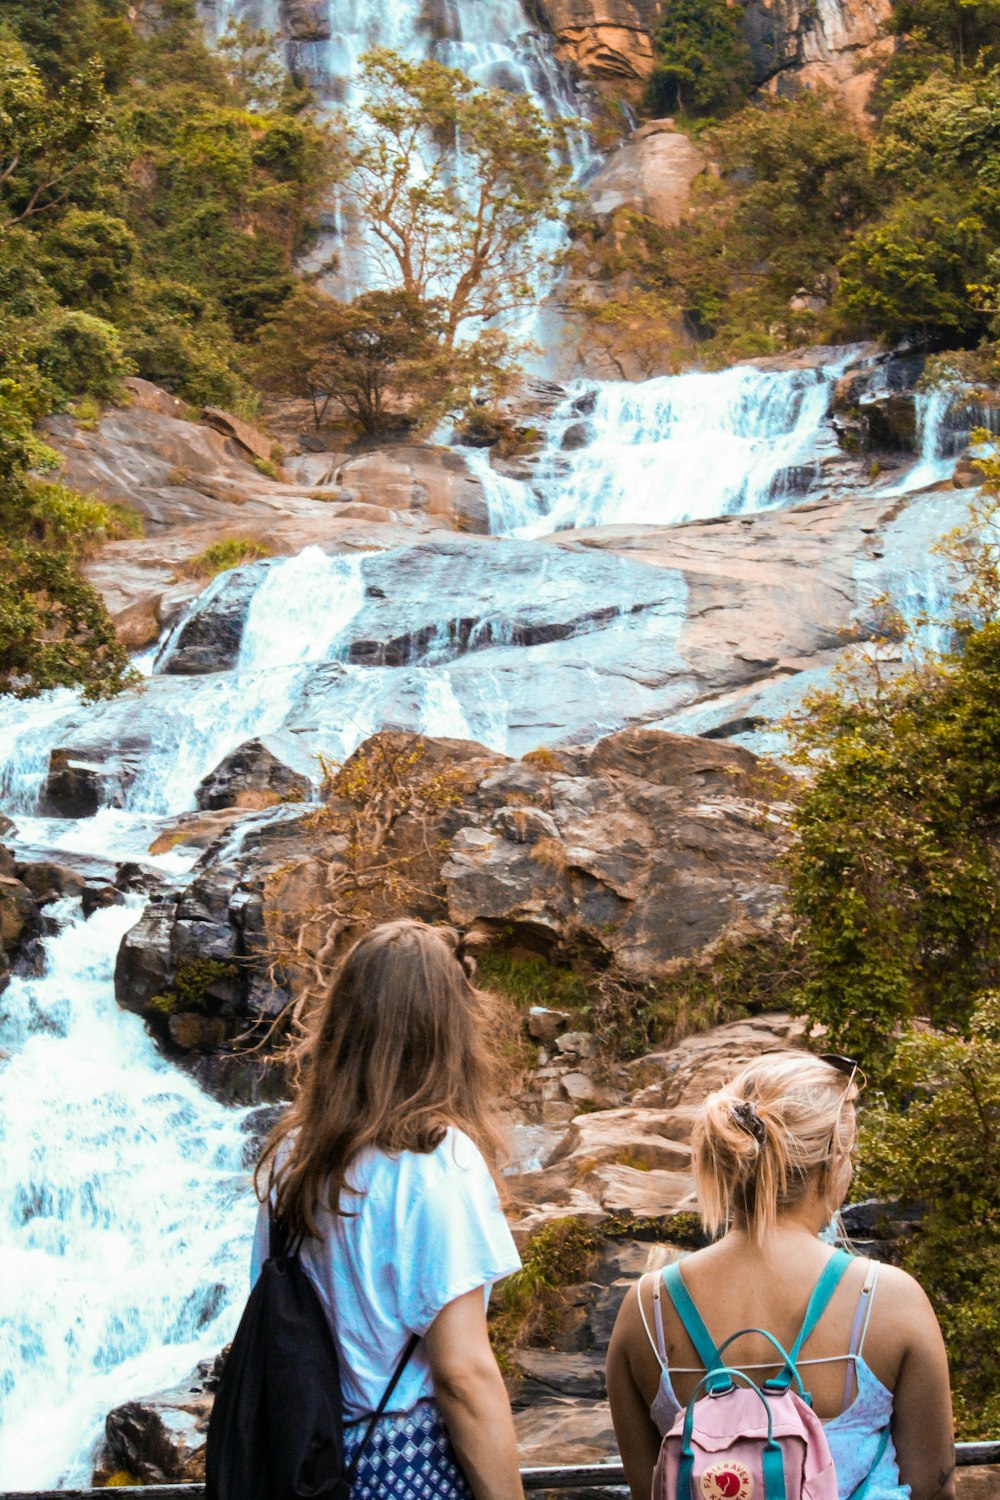 two women looking at a flowing multi-tier waterfall